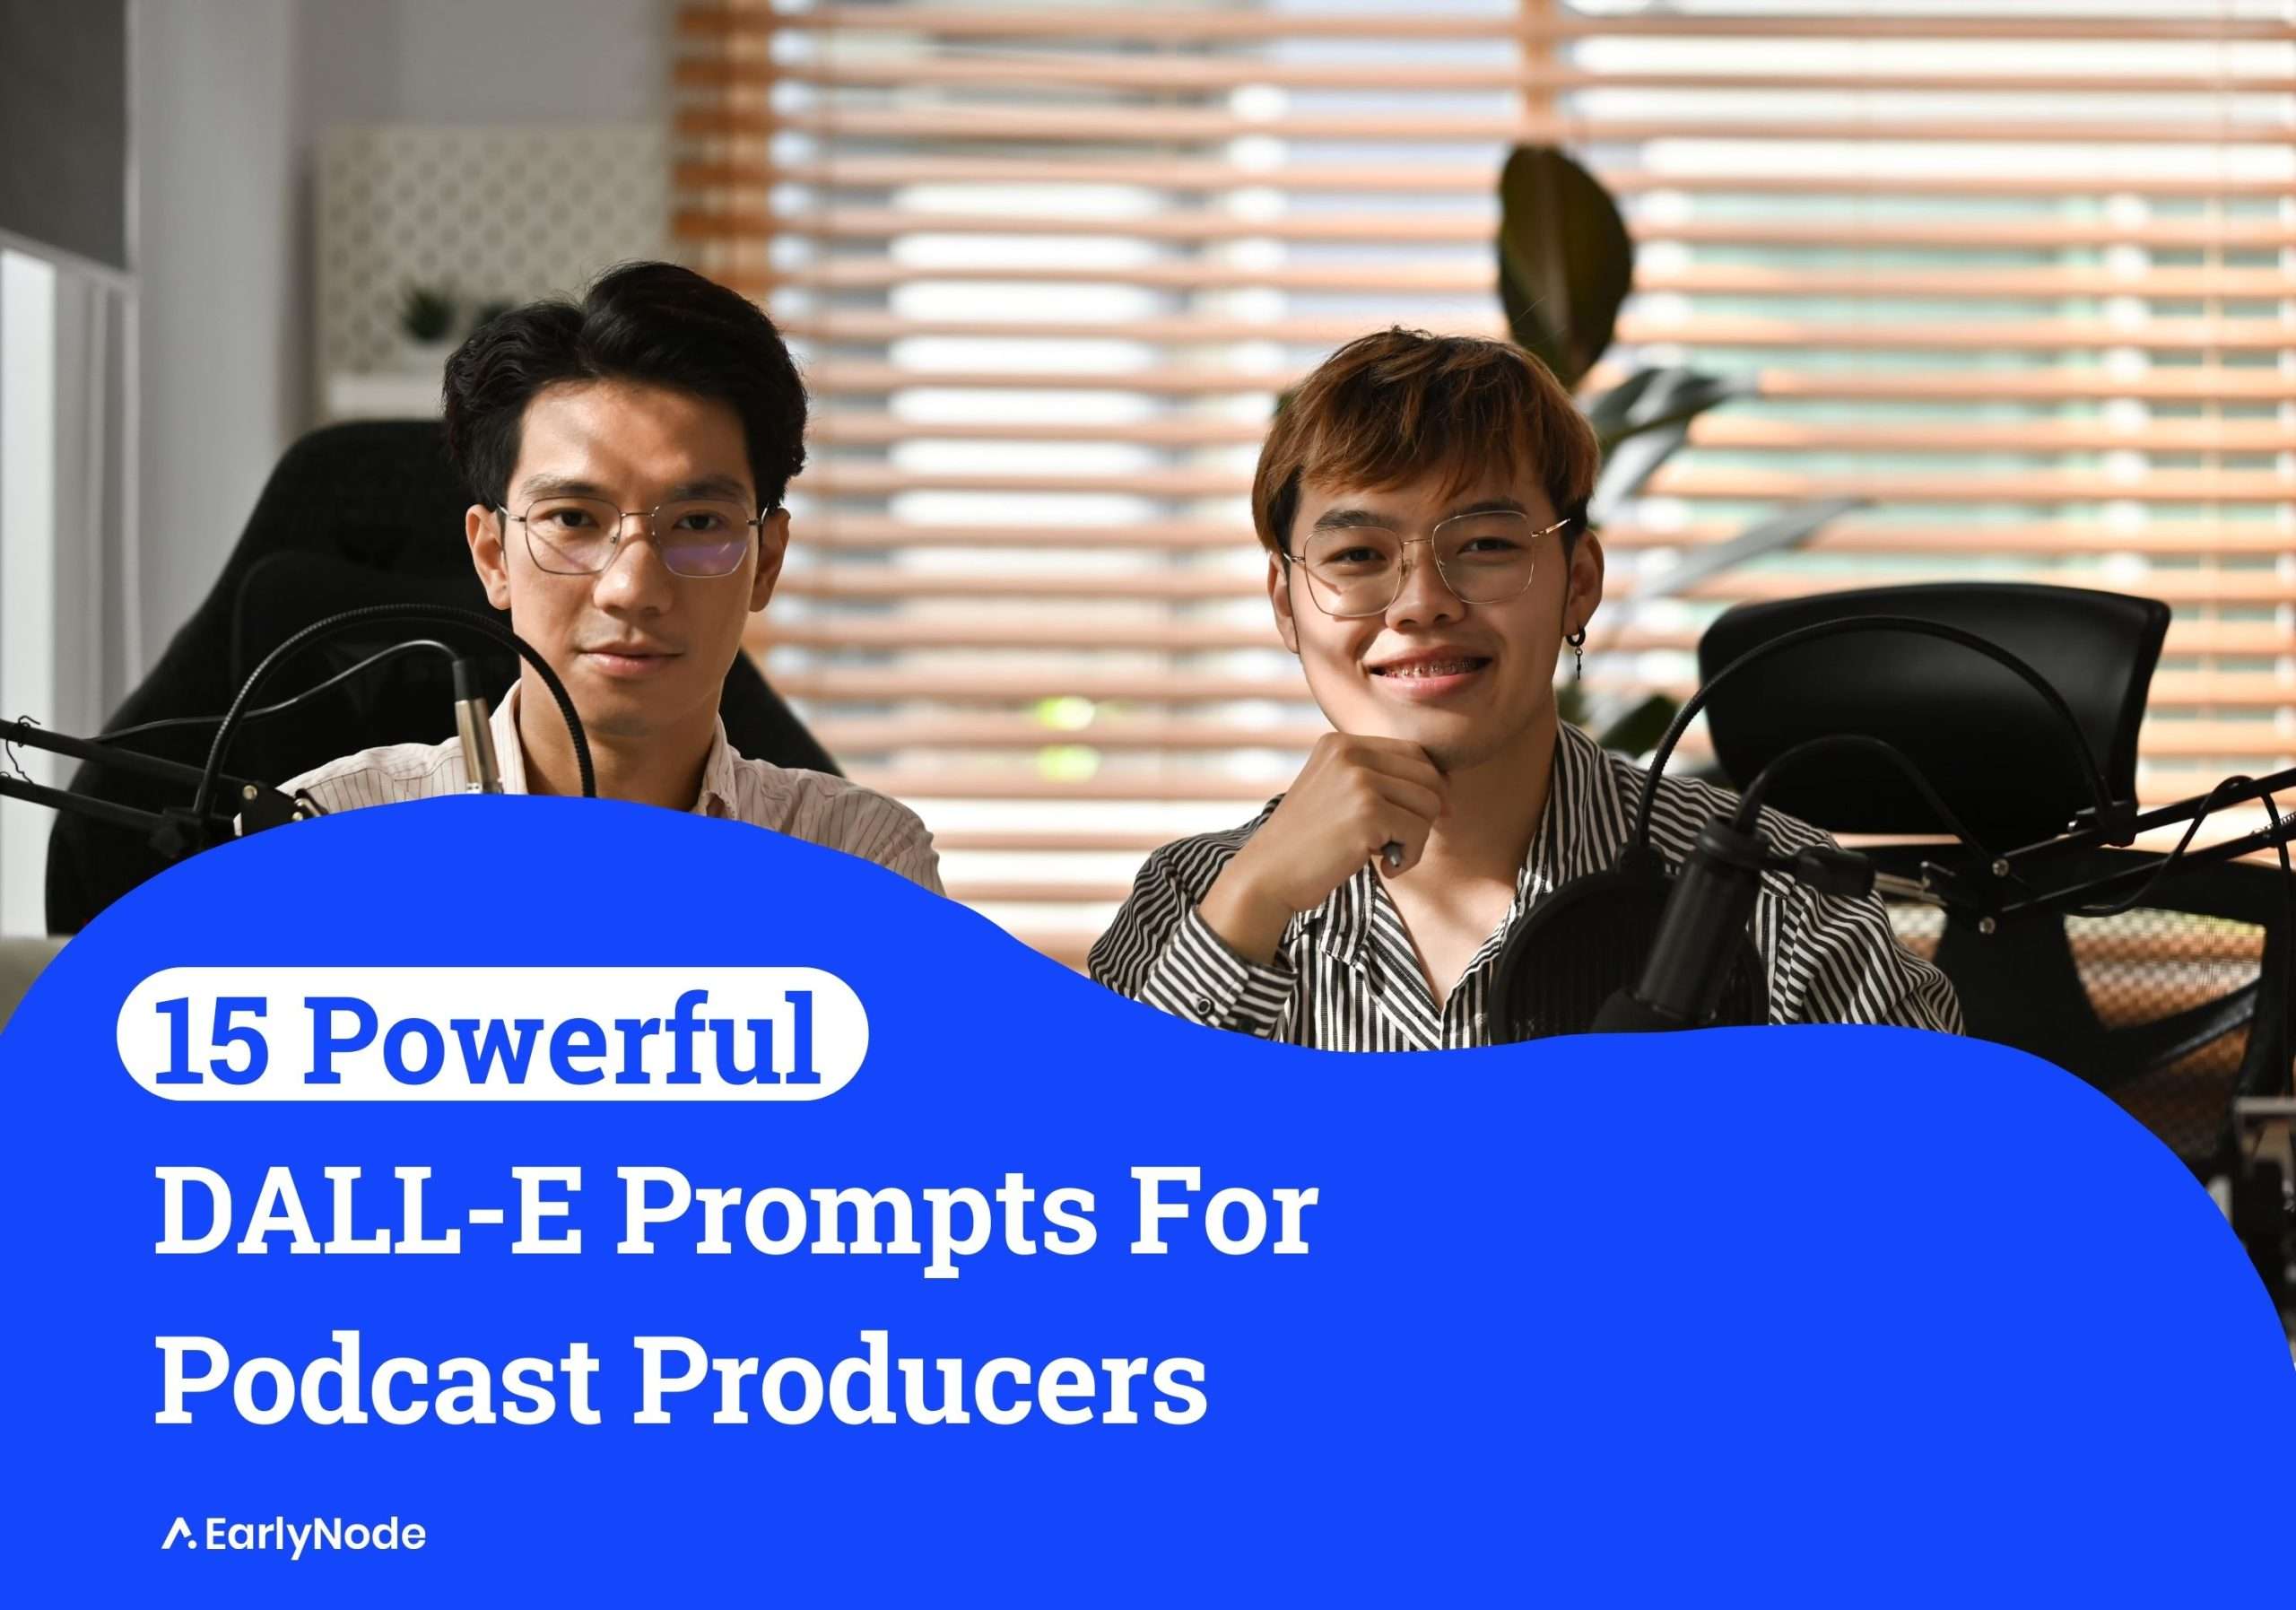 15+ Tailored DALL-E Prompts for Podcast Producers